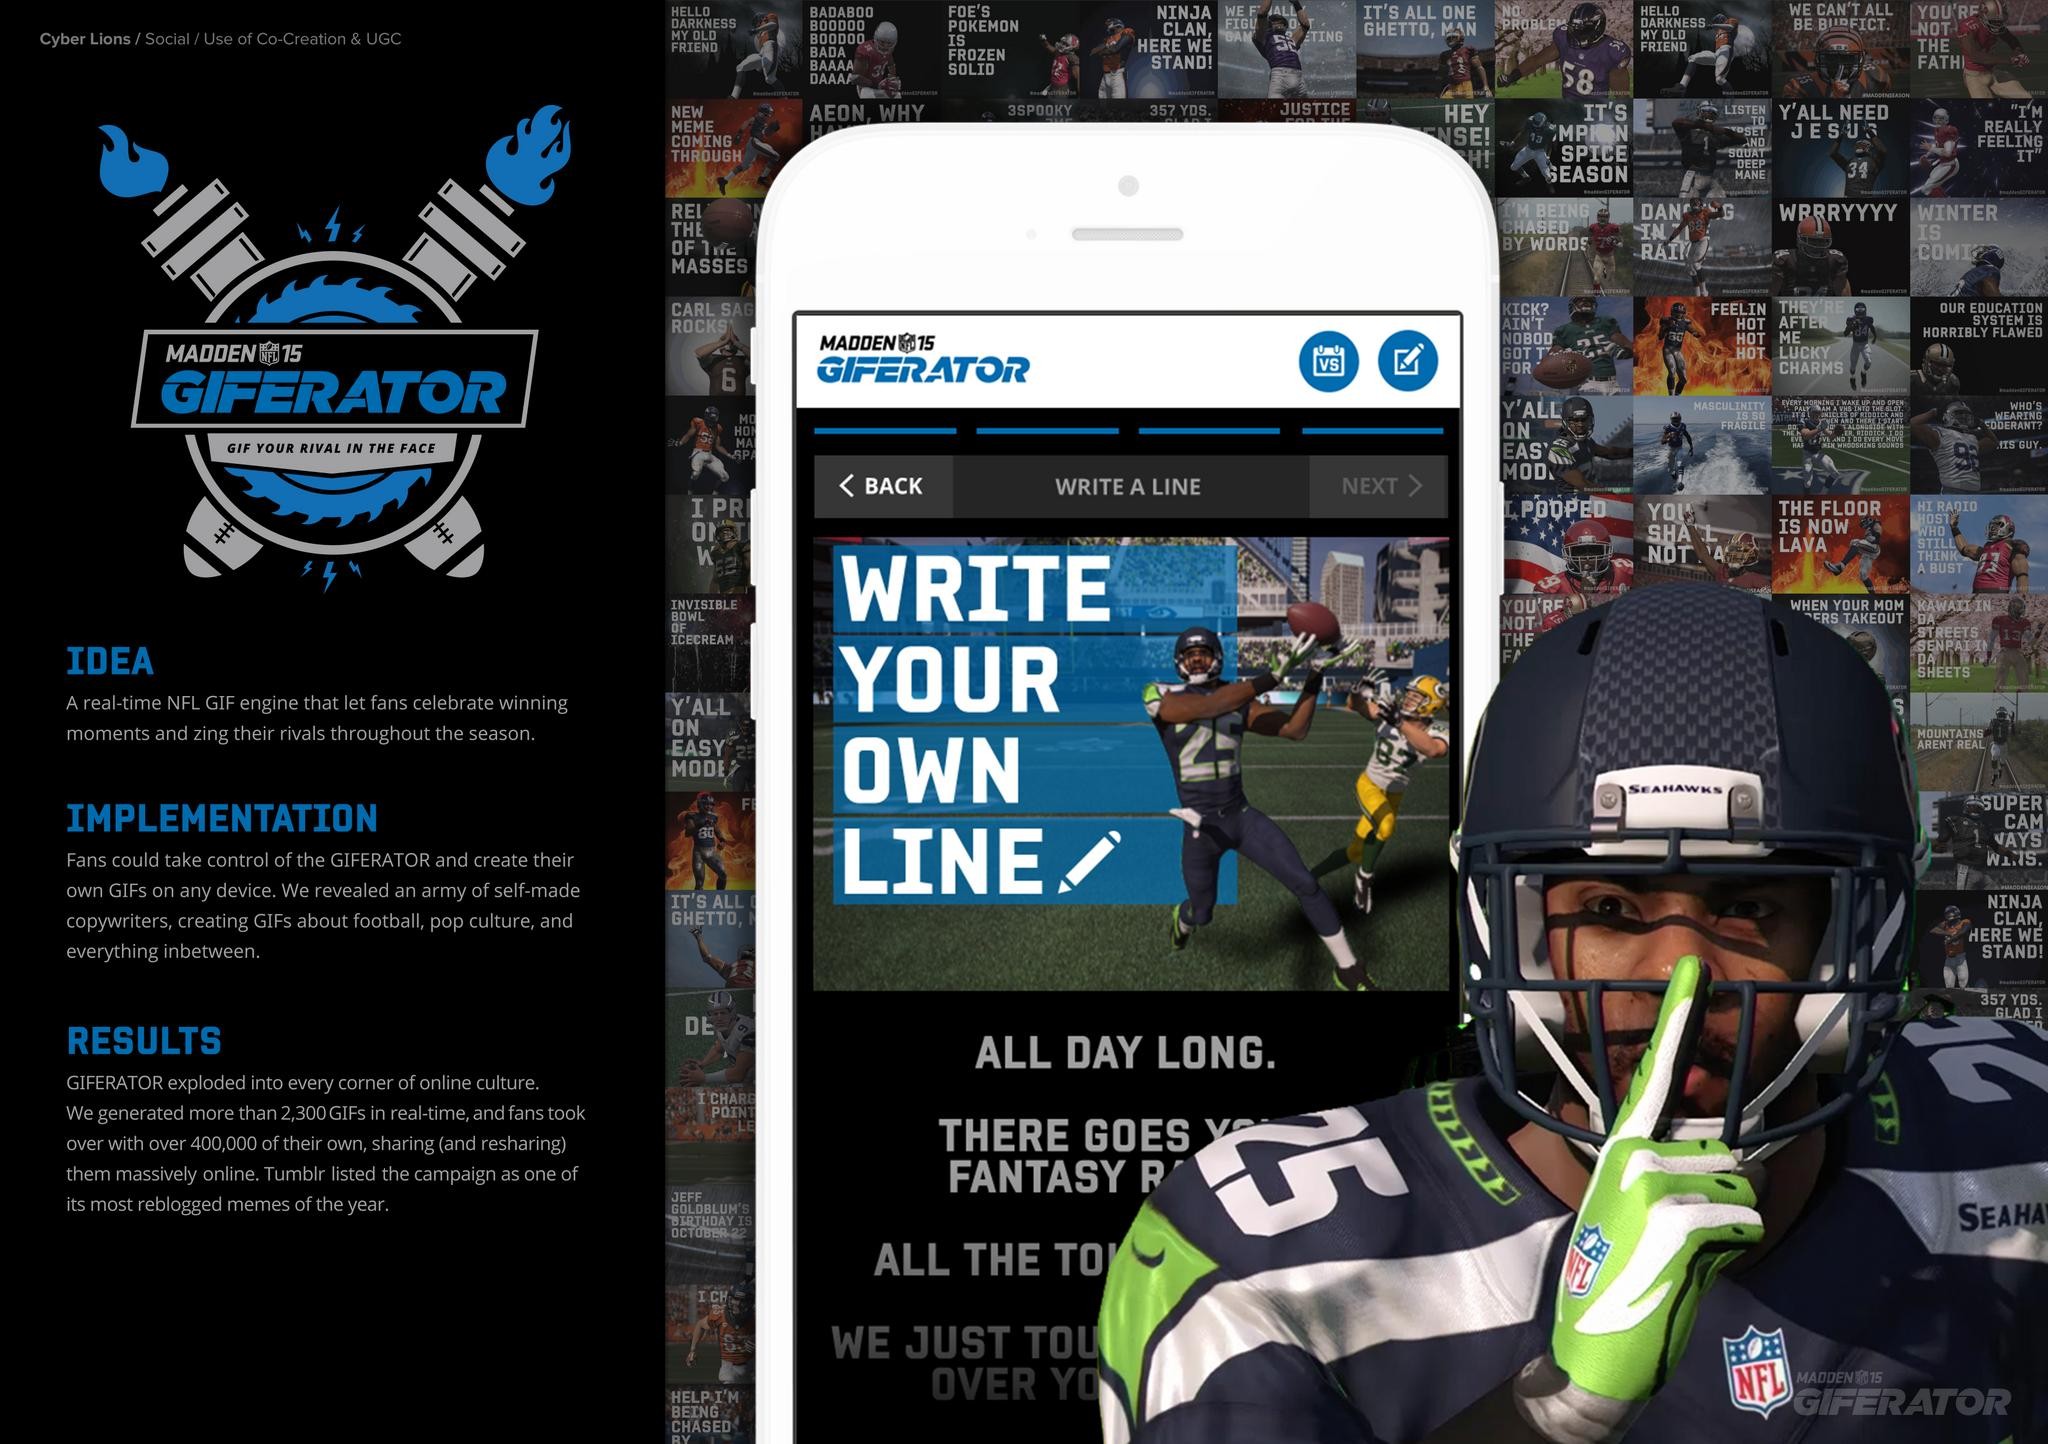 EA SPORTS MADDEN GIFERATOR: AN ART, COPY & CODE PROJECT WITH GOOGLE